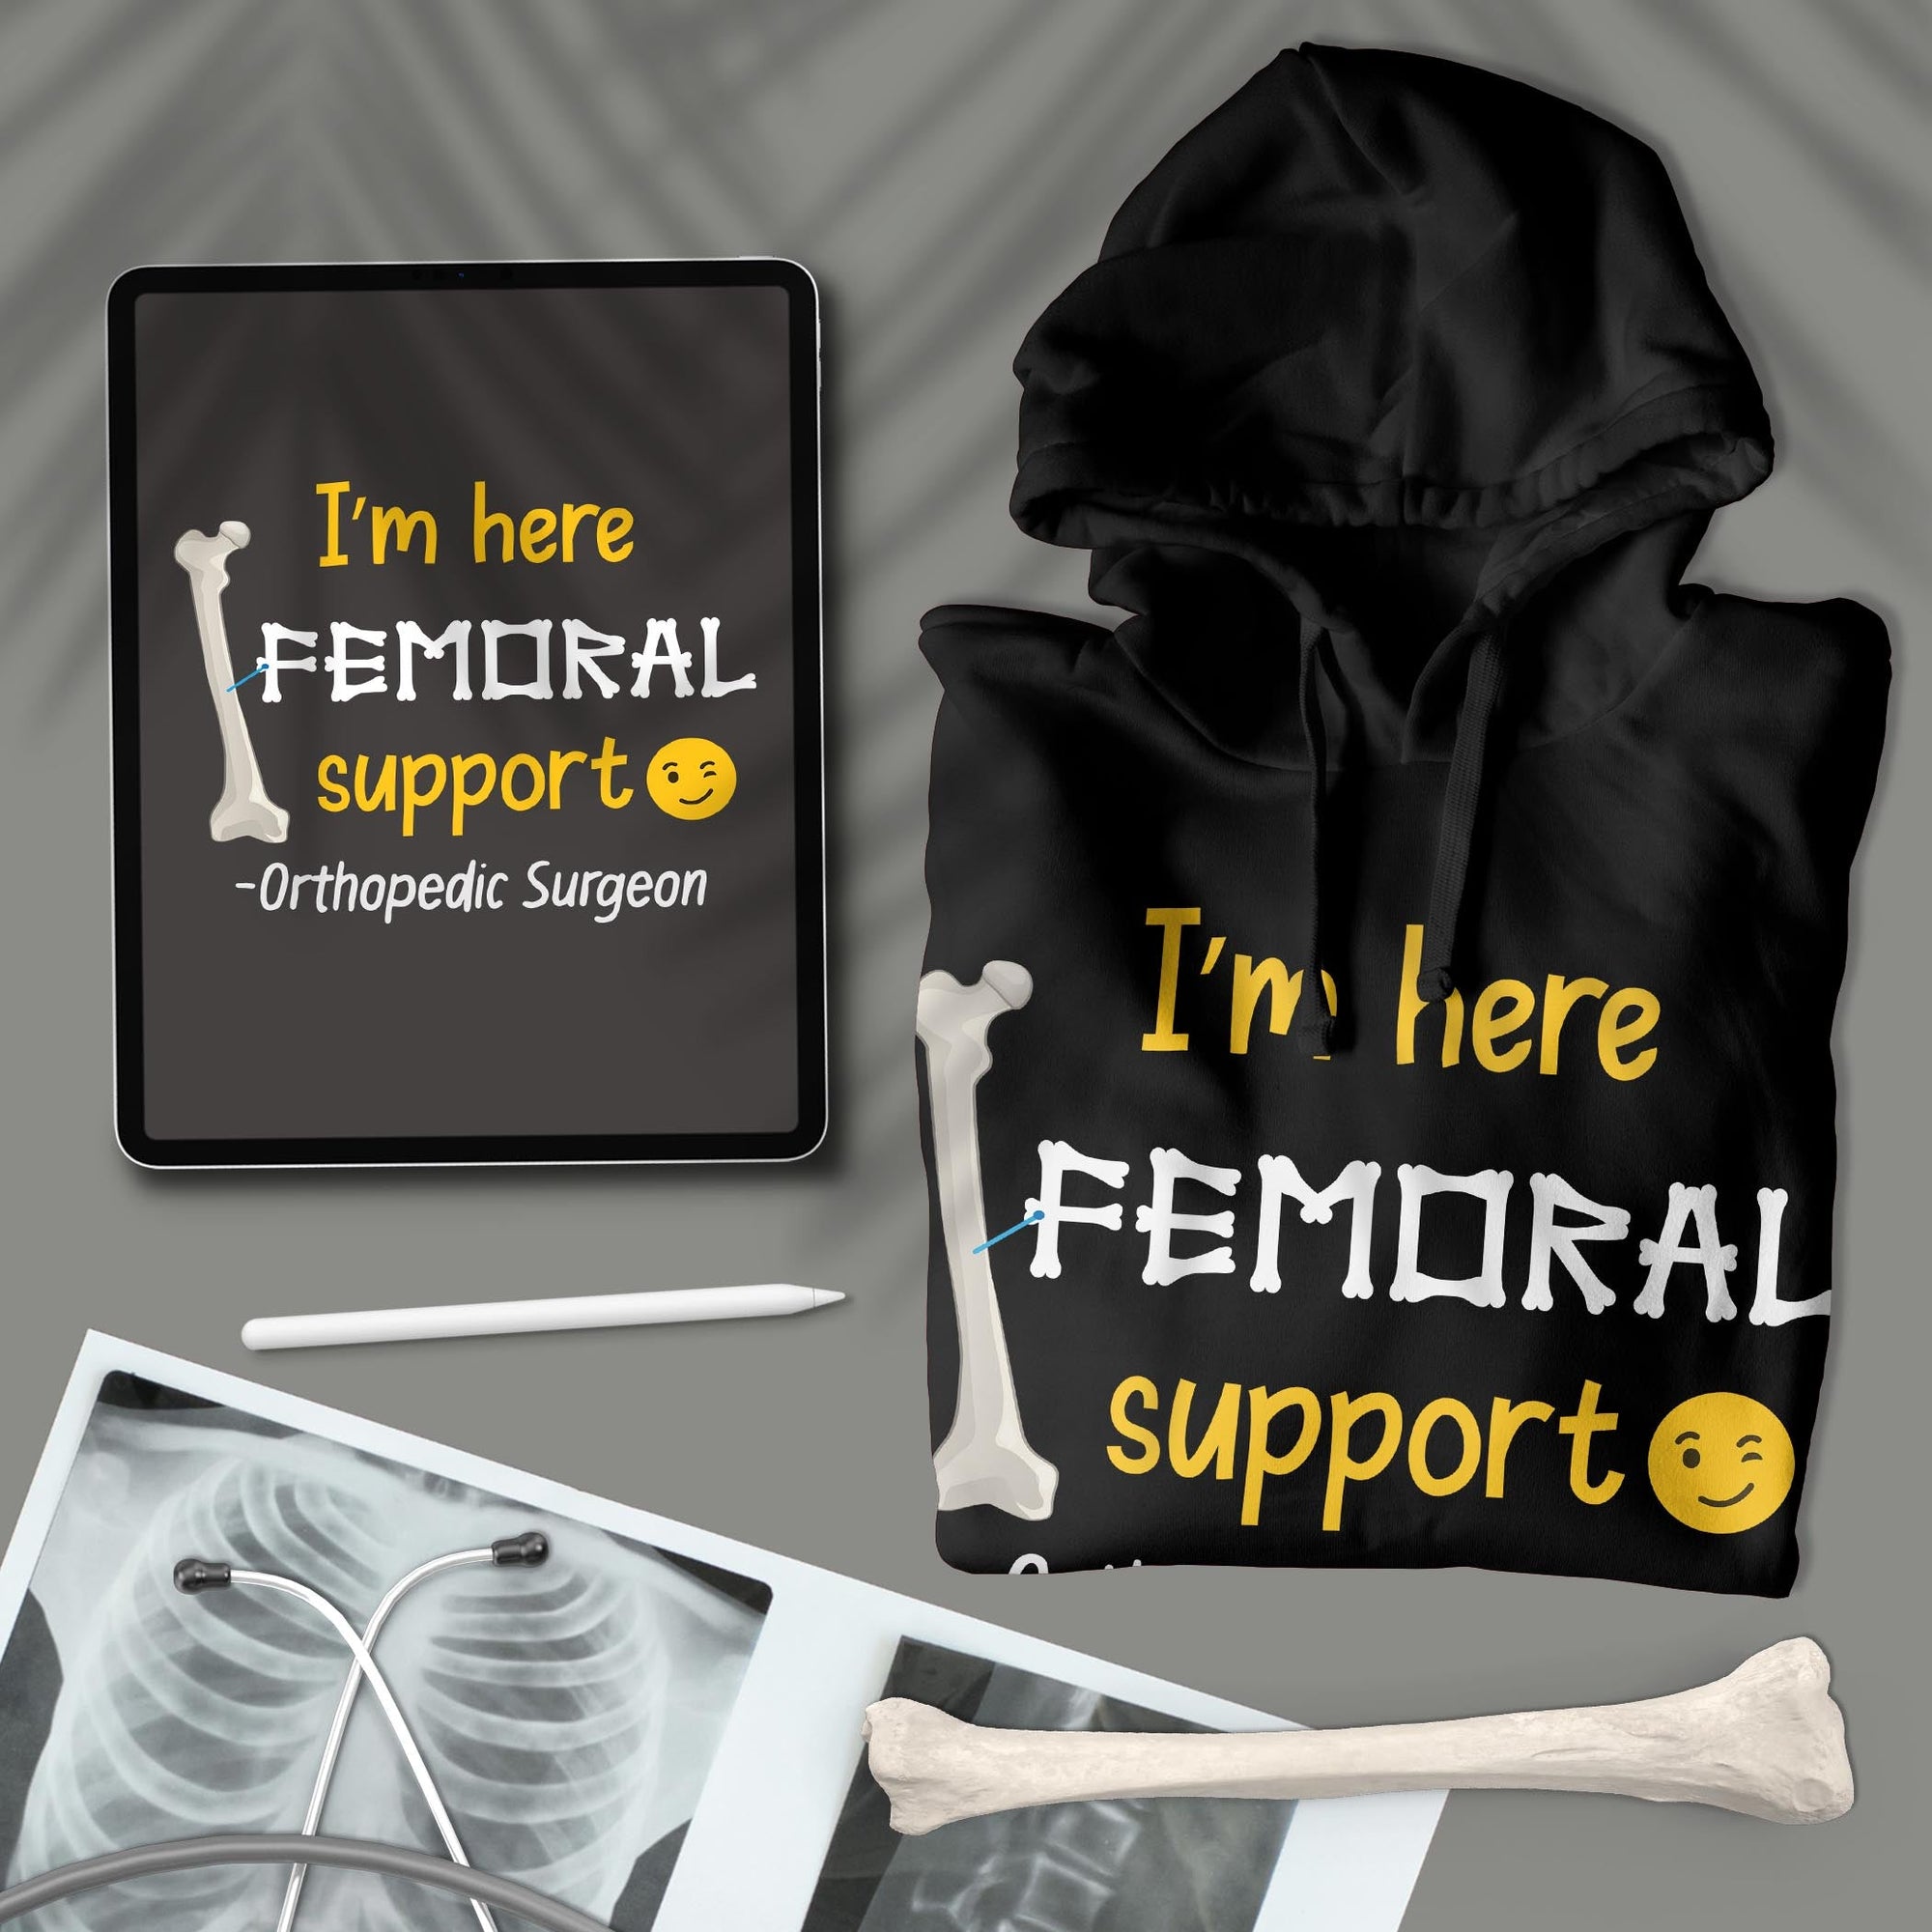 For Moral Support - Unisex Hoodie